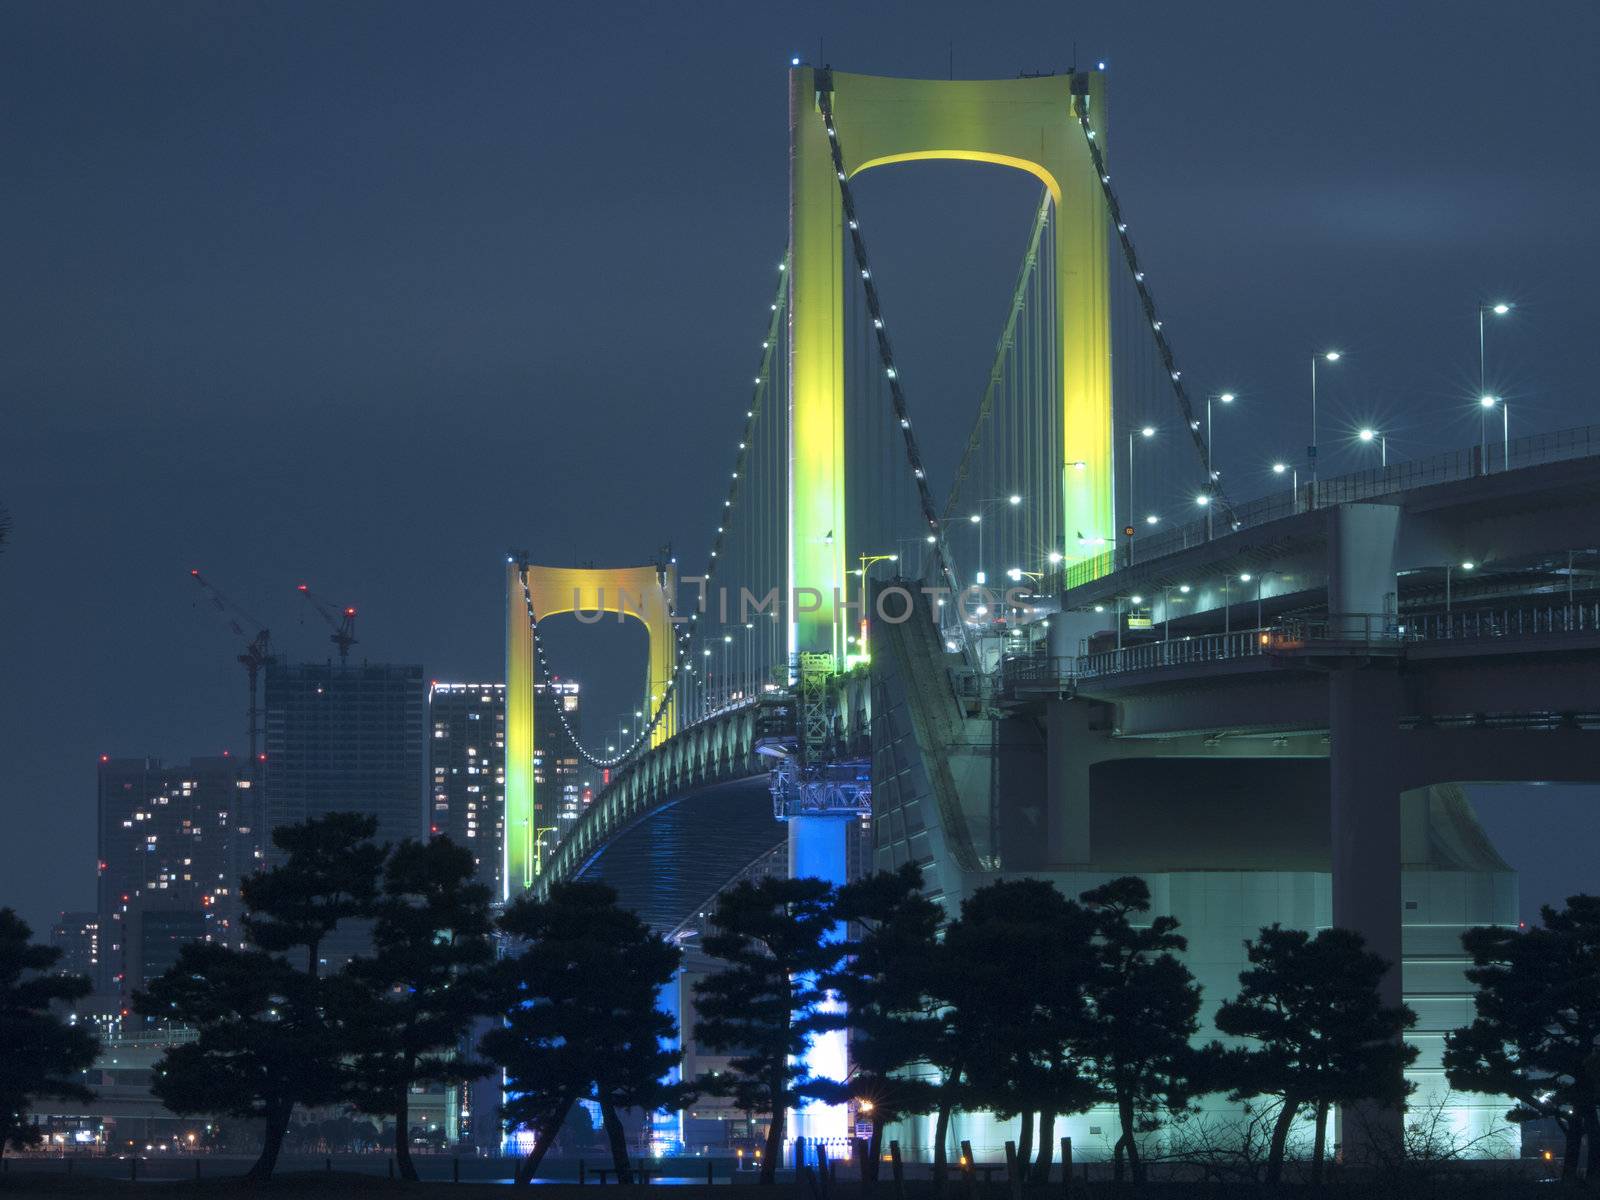 Tokyo Rainbow suspension bridge supports by night with scenic colourful illumination